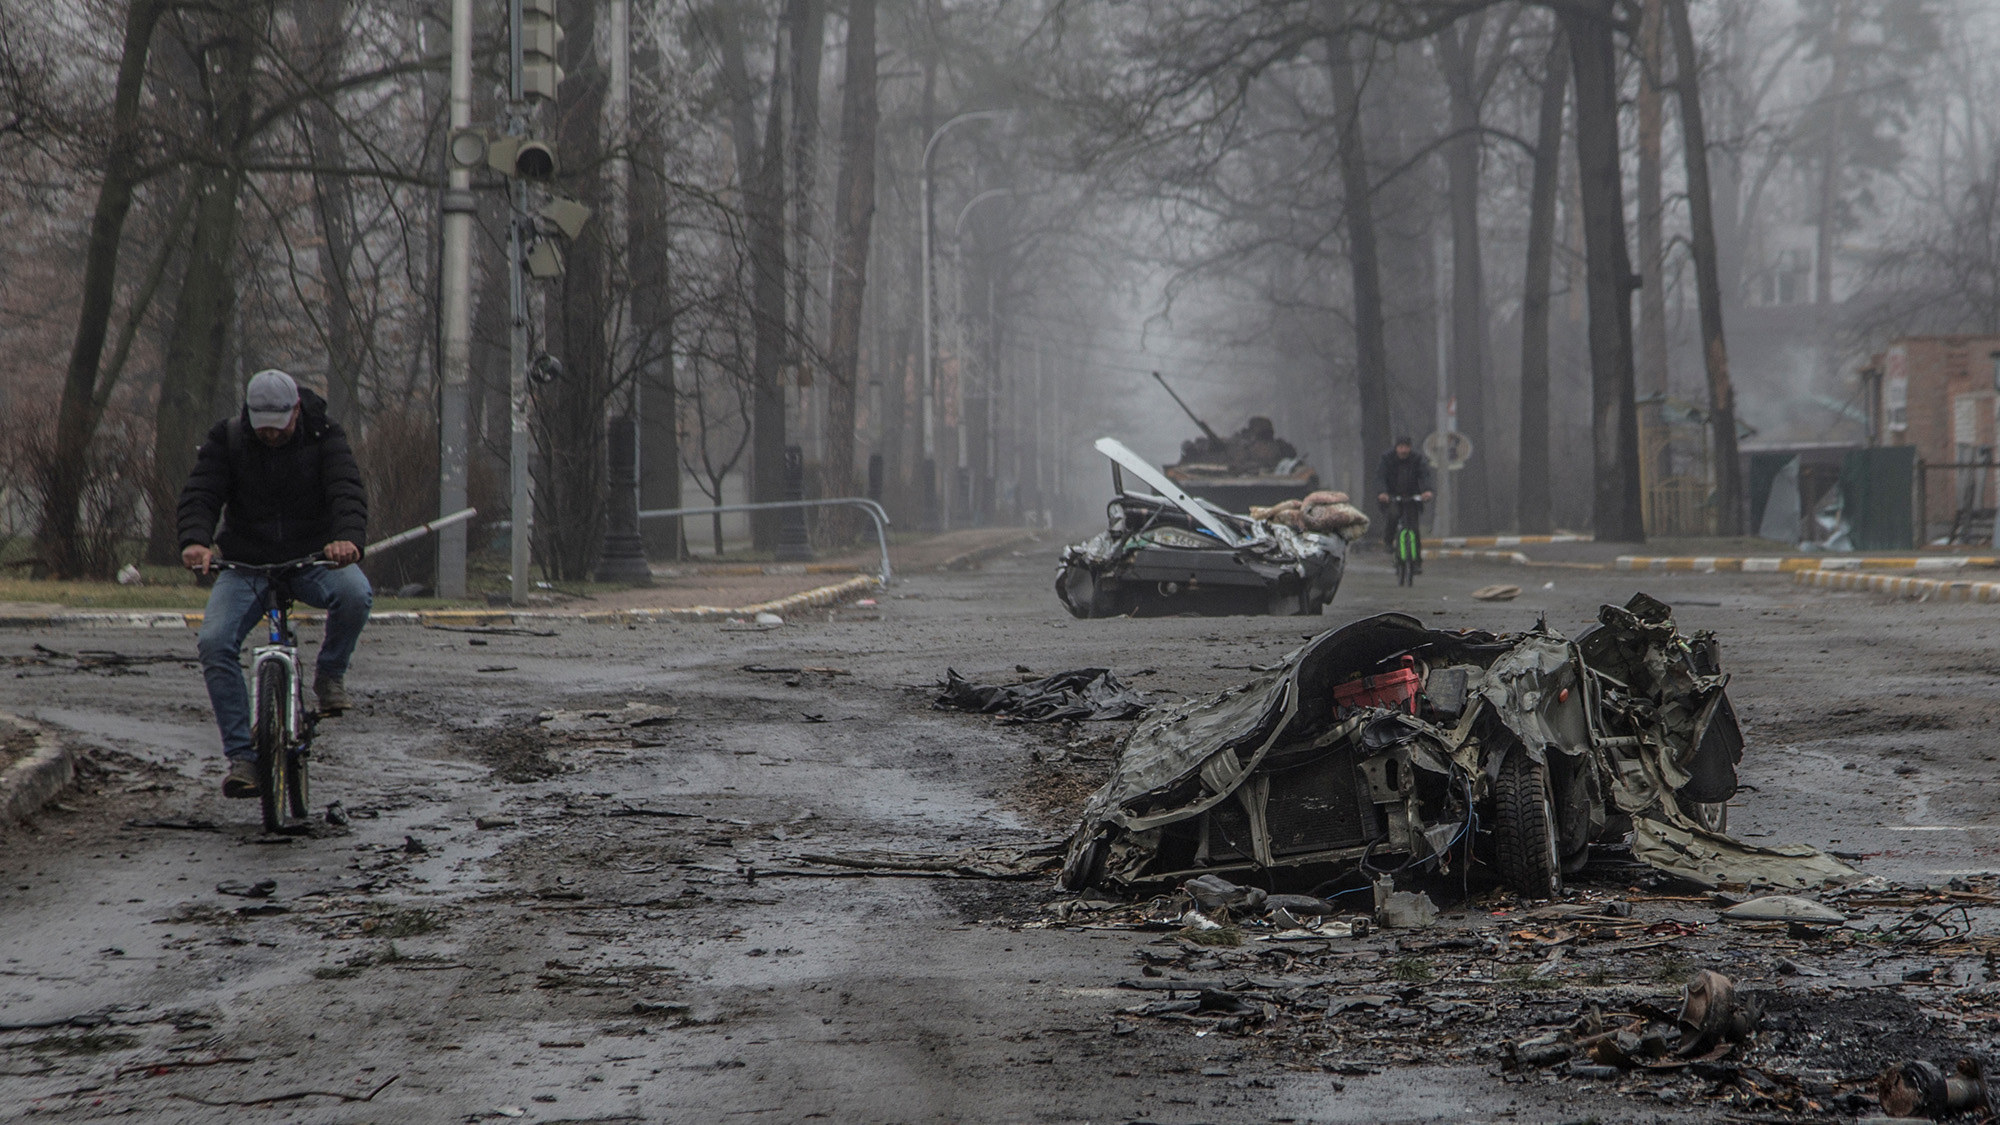 Local residents ride bicycles past flattened civilian vehicles on a street in Bucha, Ukraine on April 1.